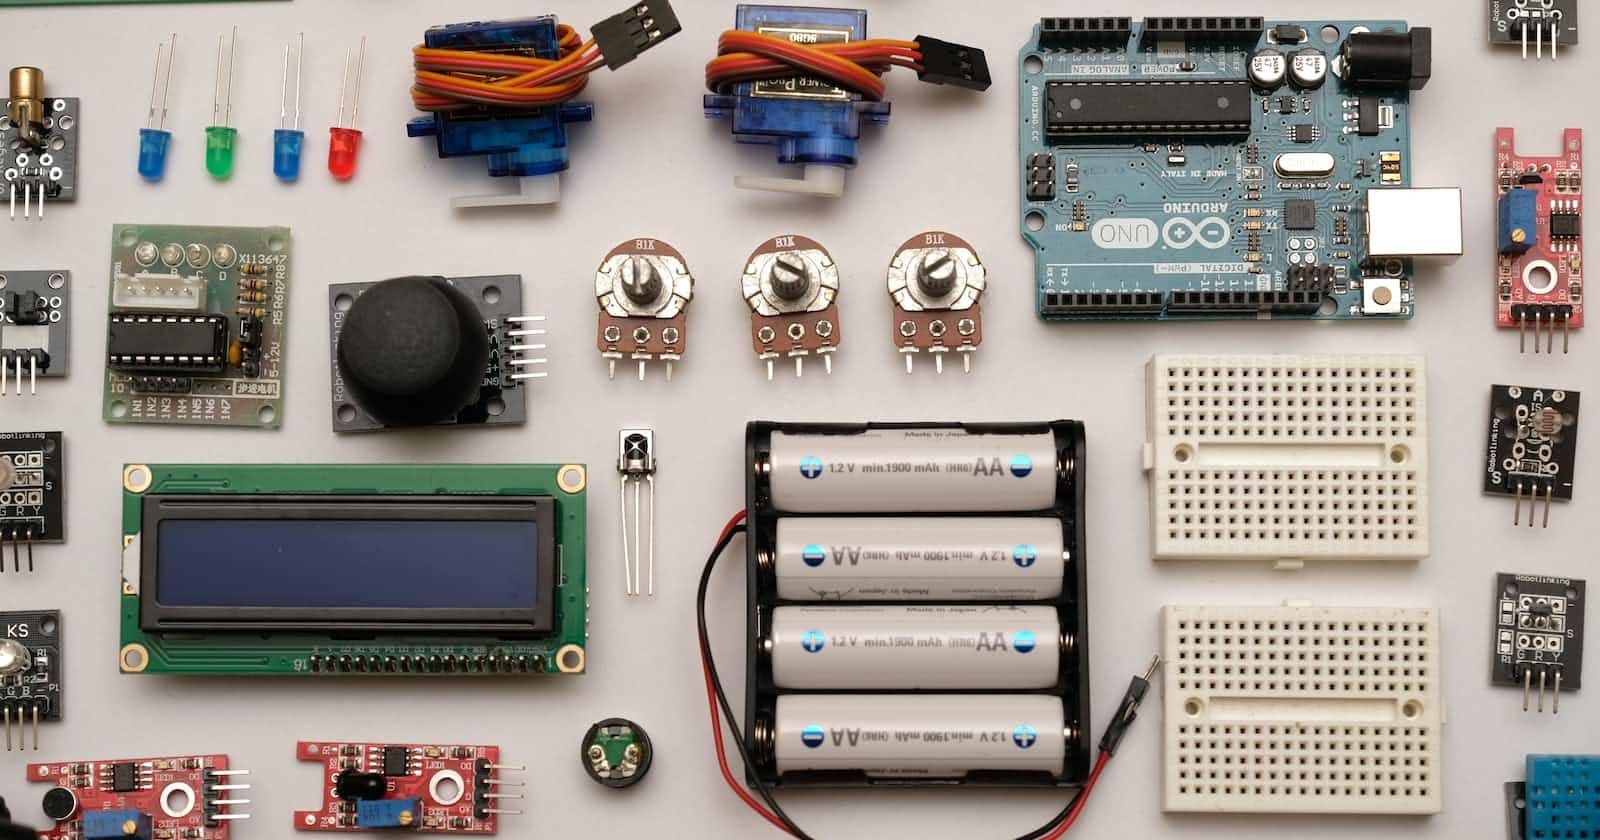 Demystifying electricity and power consumption for Arduino, embedded and IoT beginners